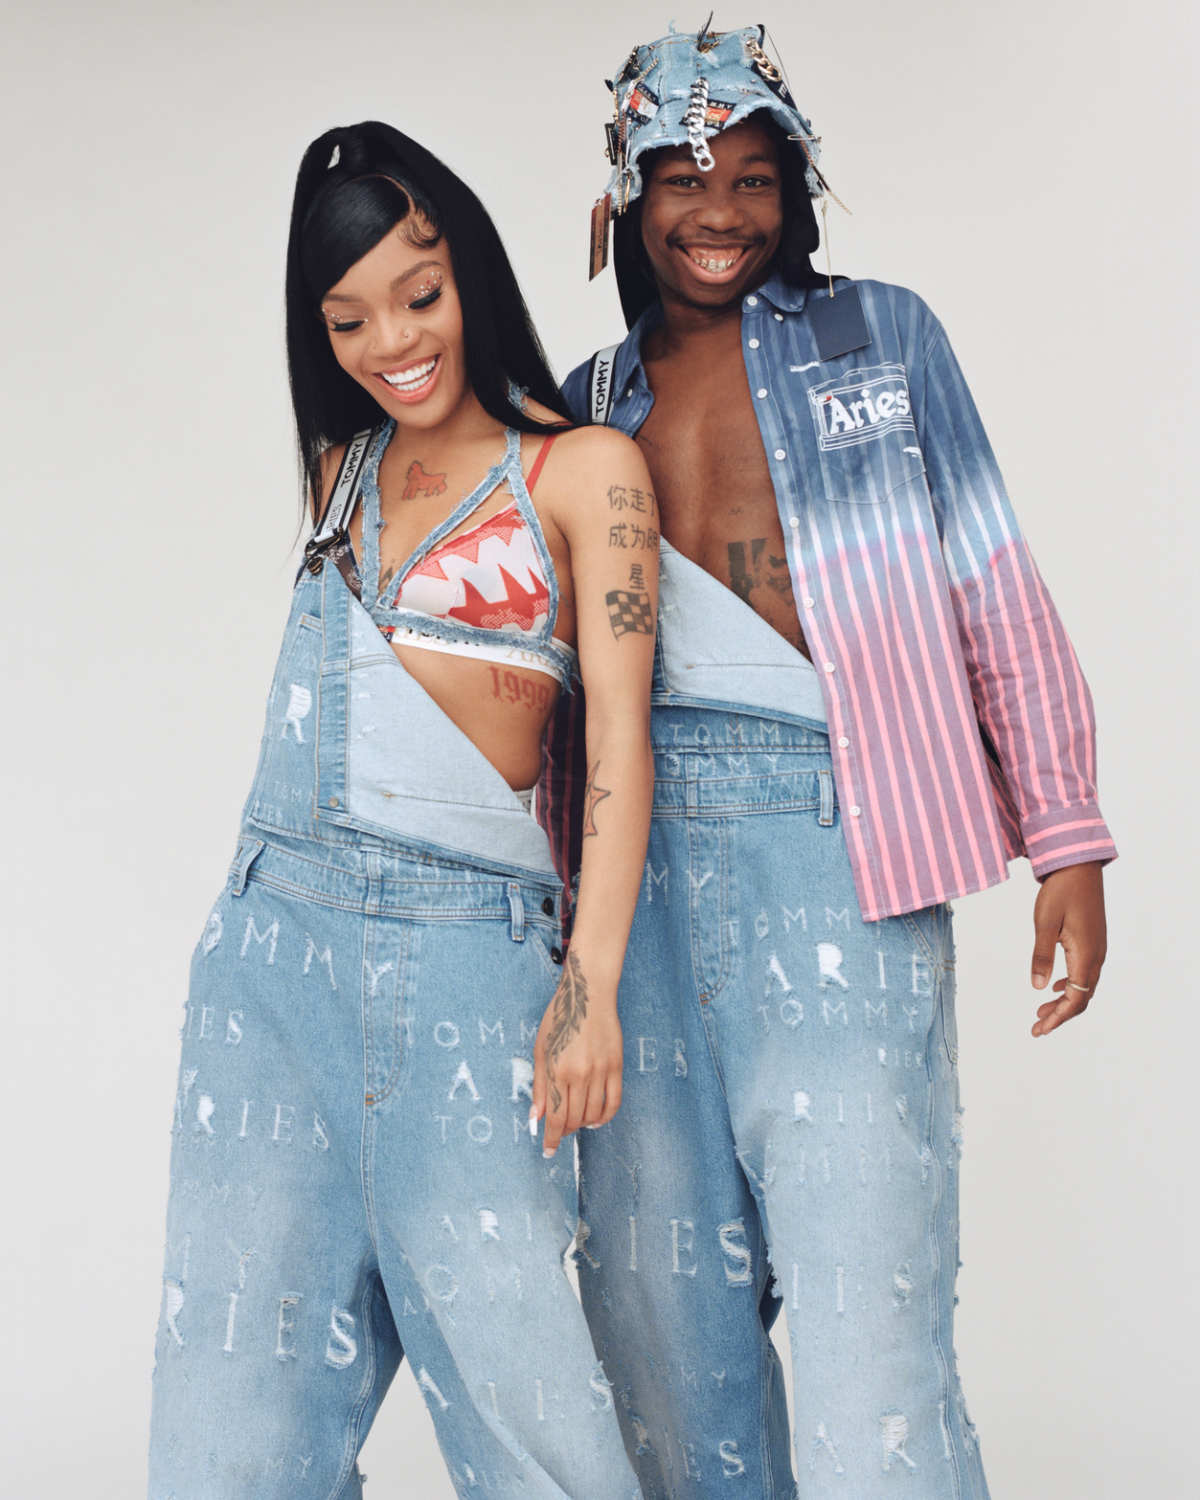 Tommy Hilfiger Announces Tommy Jeans Collaboration With London Luxury Streetwear Brand Aries